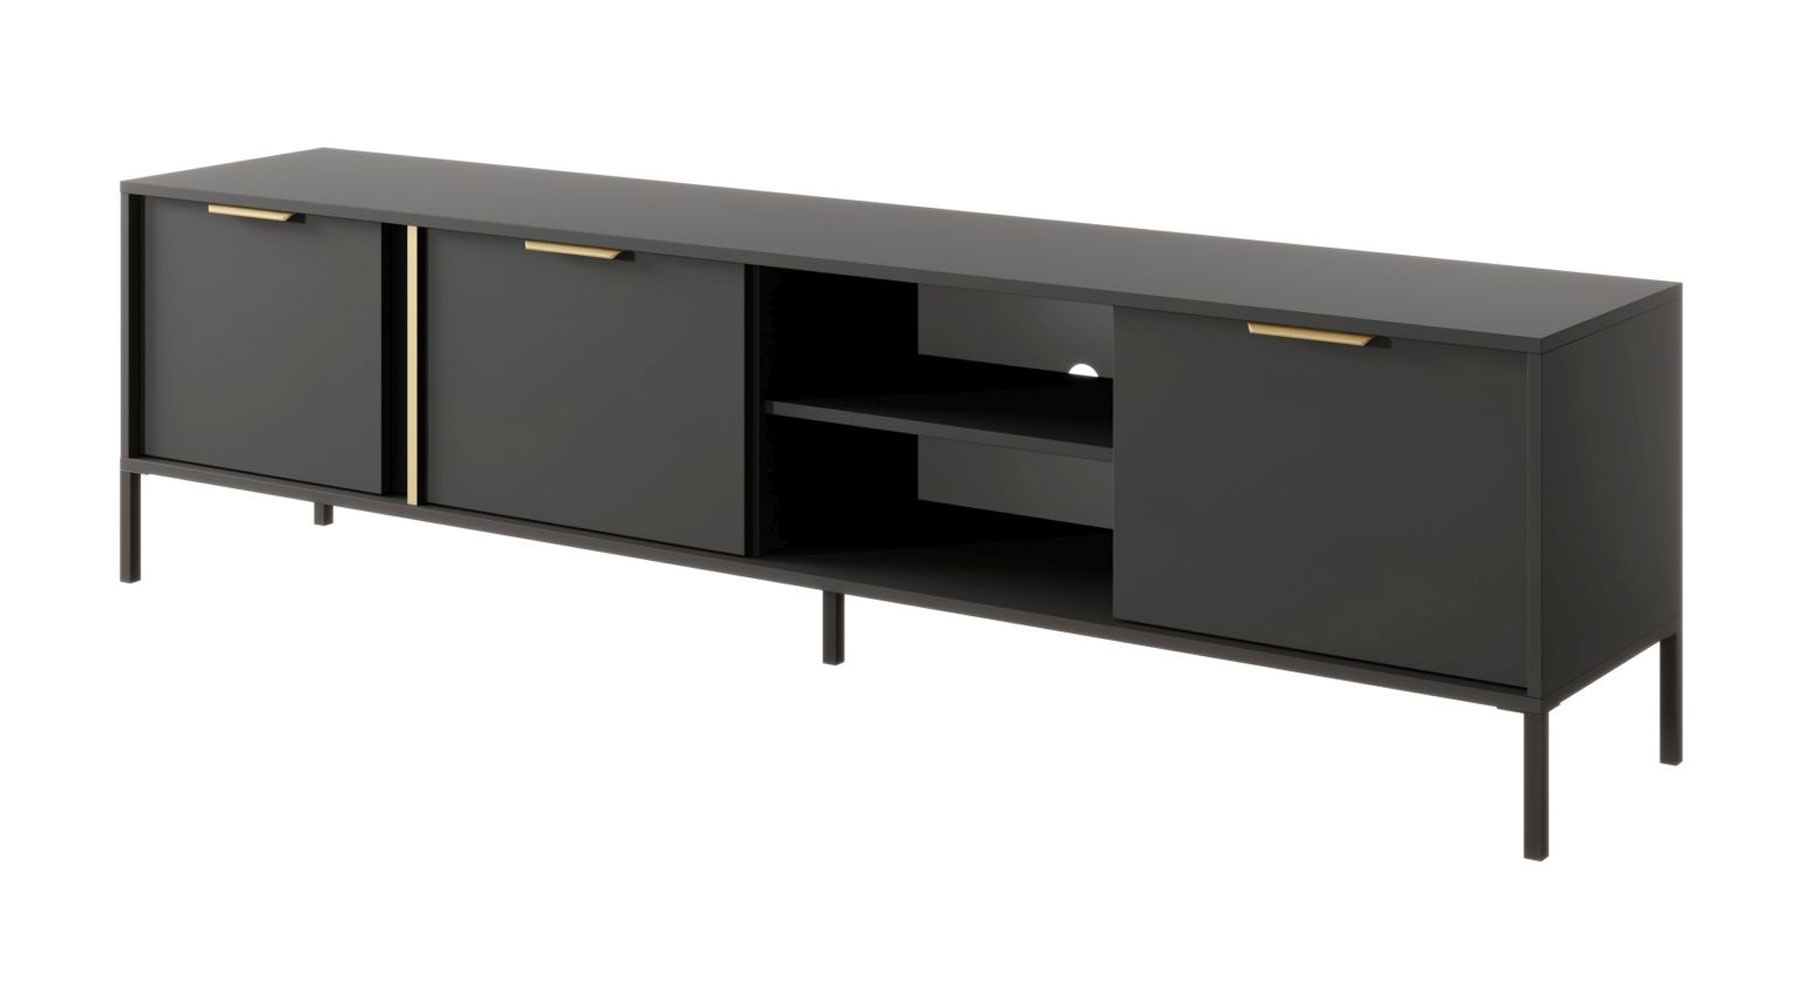 Raoued 06 TV stand with enough compartments, color: anthracite - Dimensions: 53 x 203 x 39.5 cm (H x W x D)